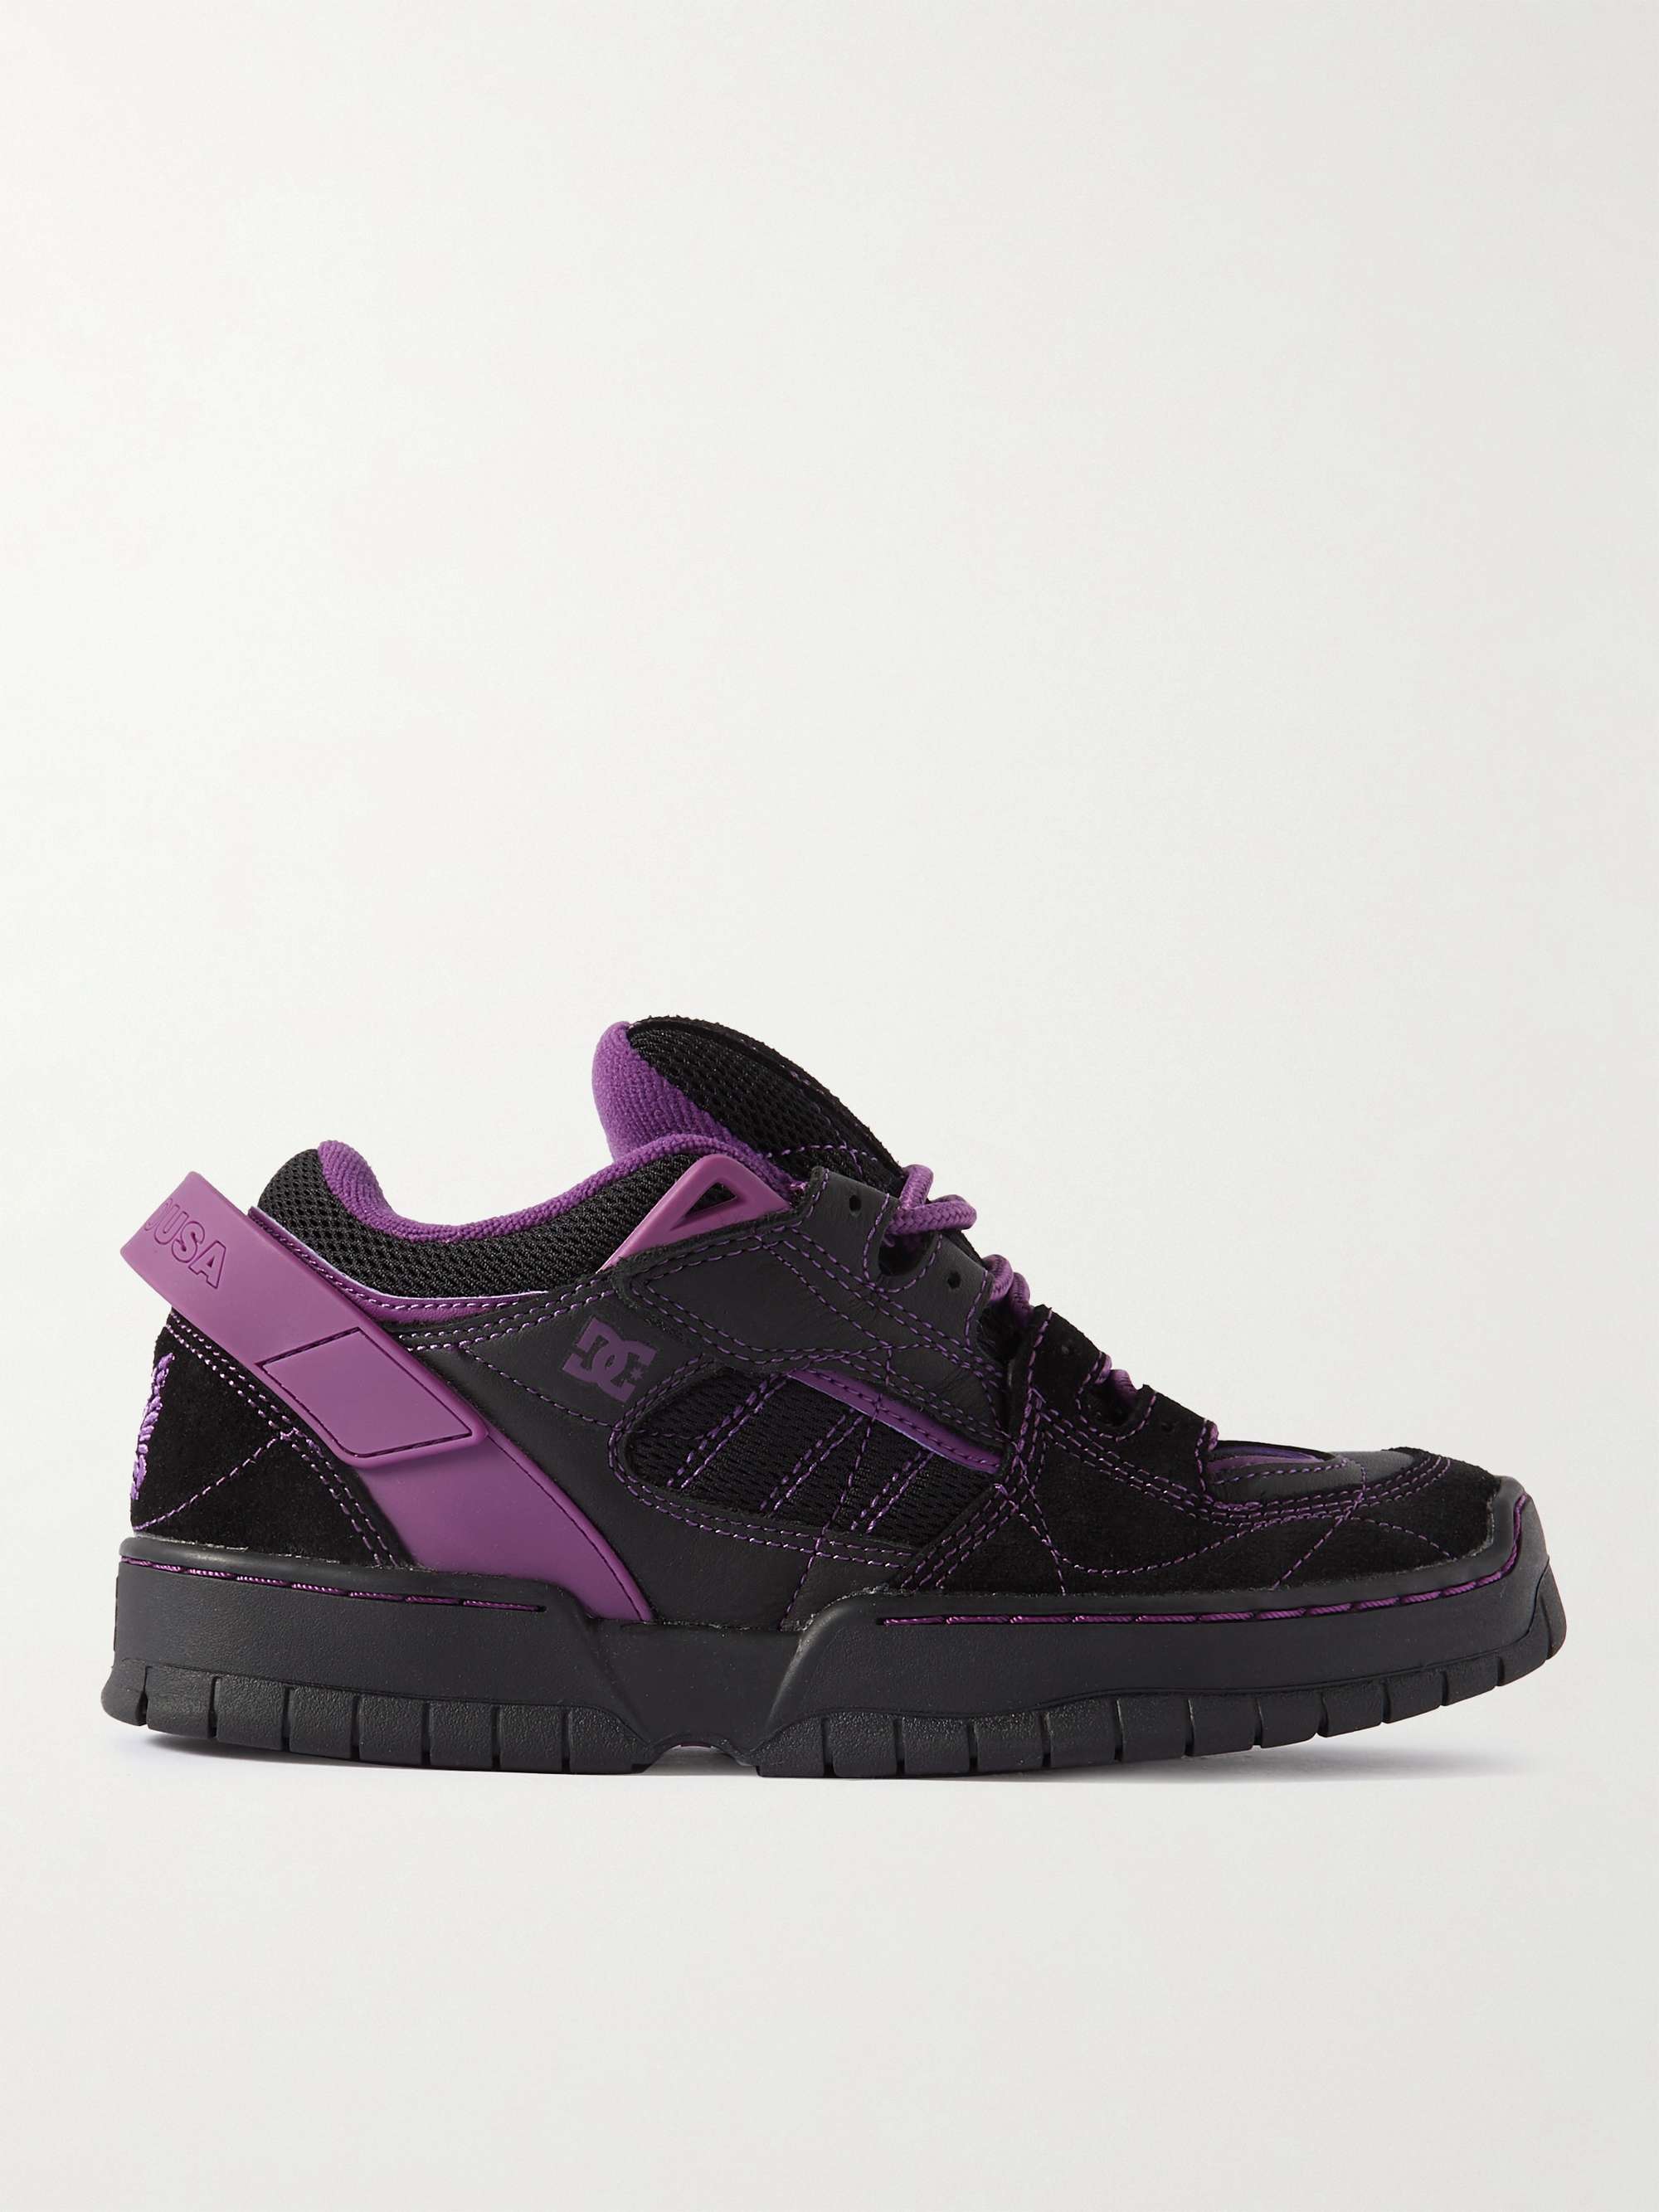 NEEDLES + DC Shoes Spectre Rubber-Trimmed Leather, Mesh and Suede Sneakers  for Men | MR PORTER